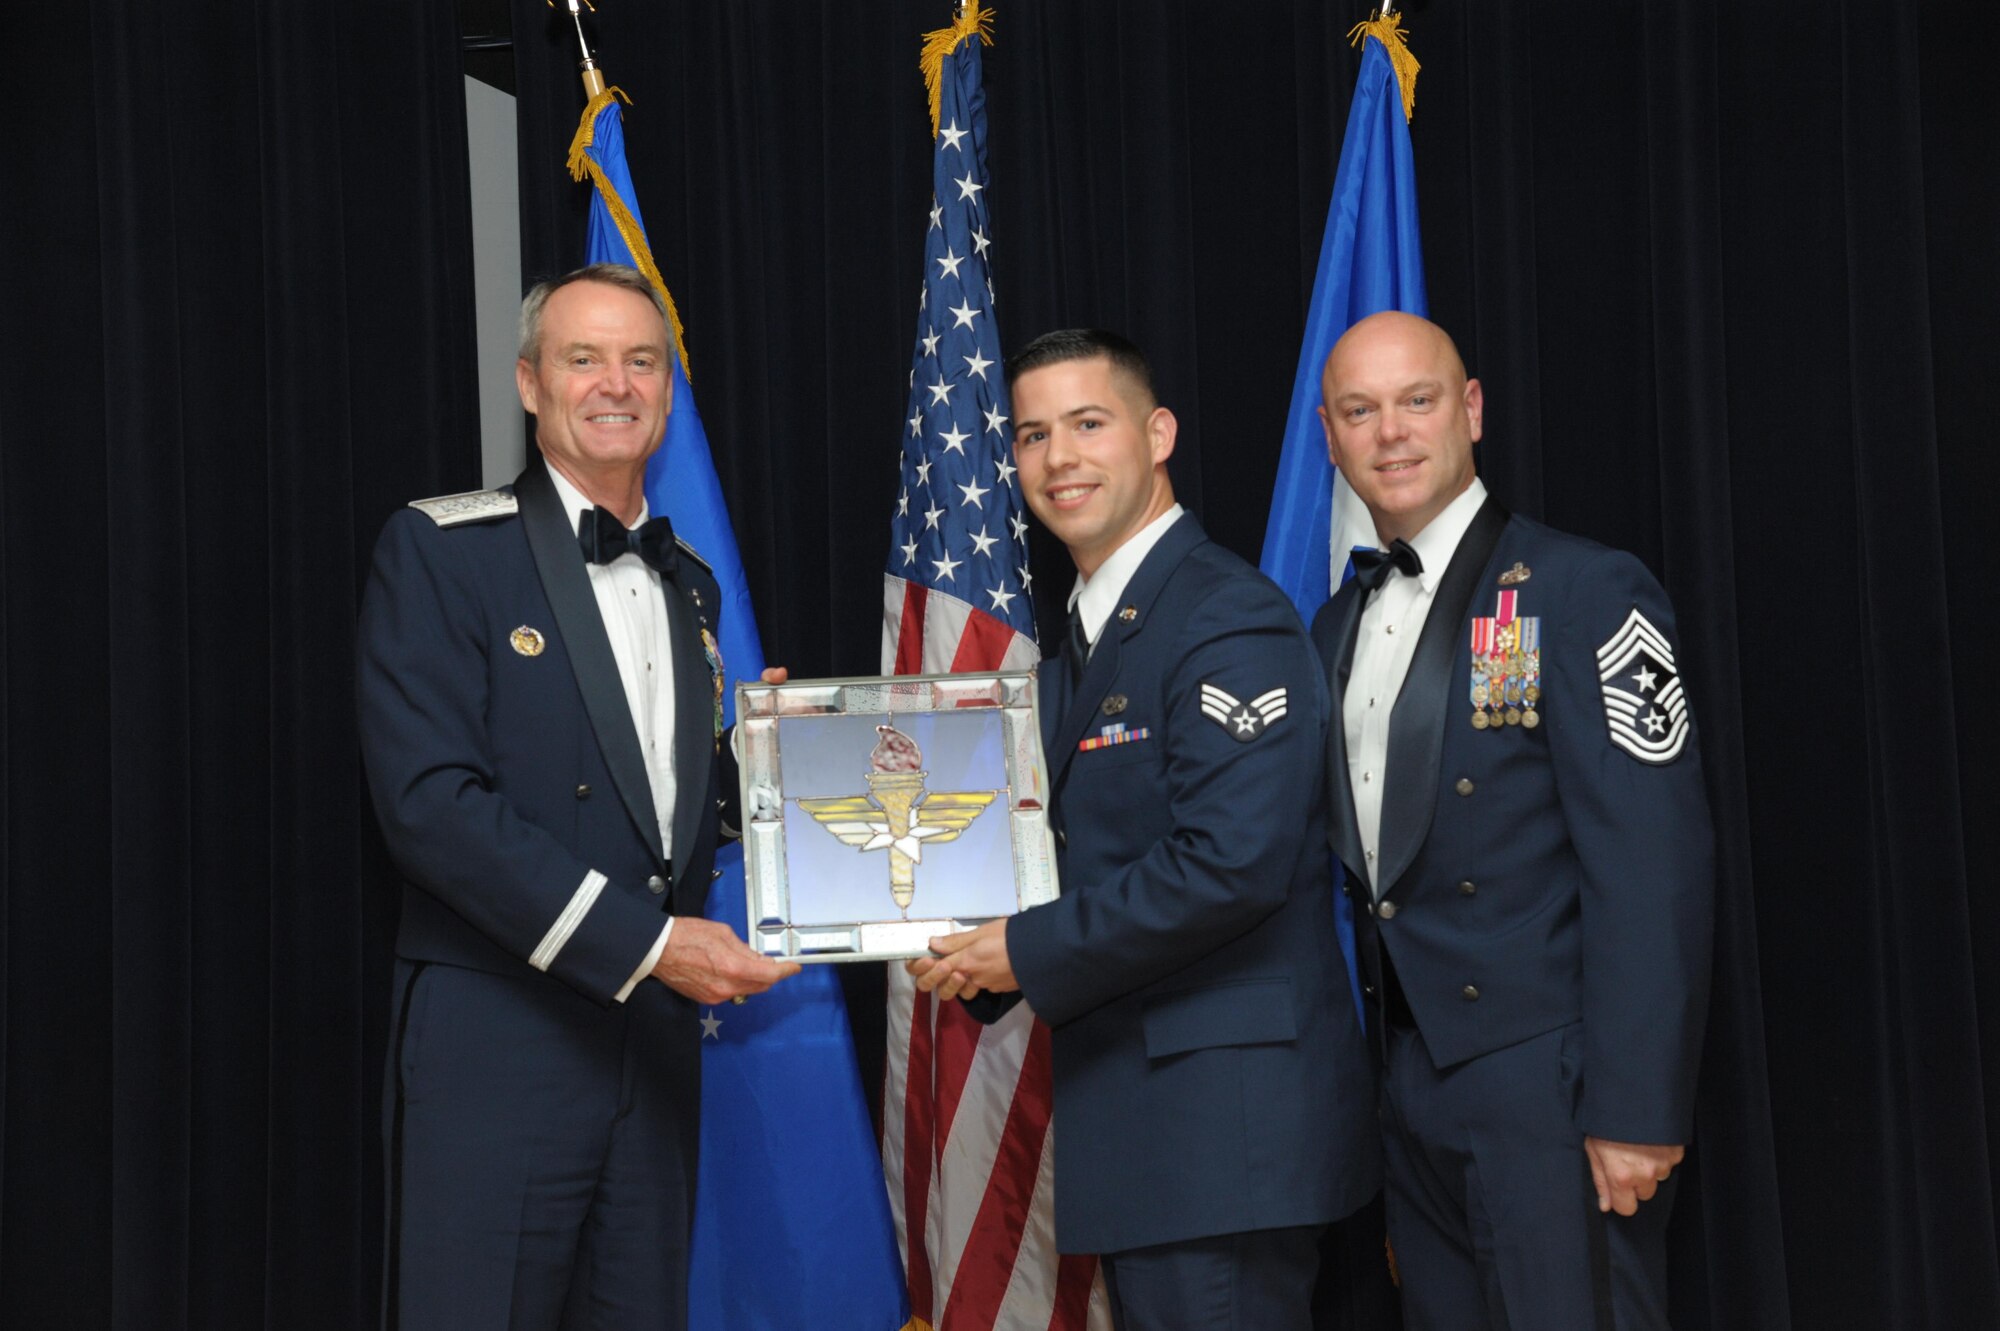 Senior Airman Jan Diaz Garcia, 56th Maintenance Group, Luke Air Force Base, Arizona, receives an award from Lt. Gen. Darryl Roberson, commander, Air Education and Training Command and AETC Command Chief Master Sgt. David Staton during a ceremony here, June 16. Diaz Garcia was selected as the AETC Honor Guard Member of the Year. (U.S. Air Force photo by Joel Martinez)